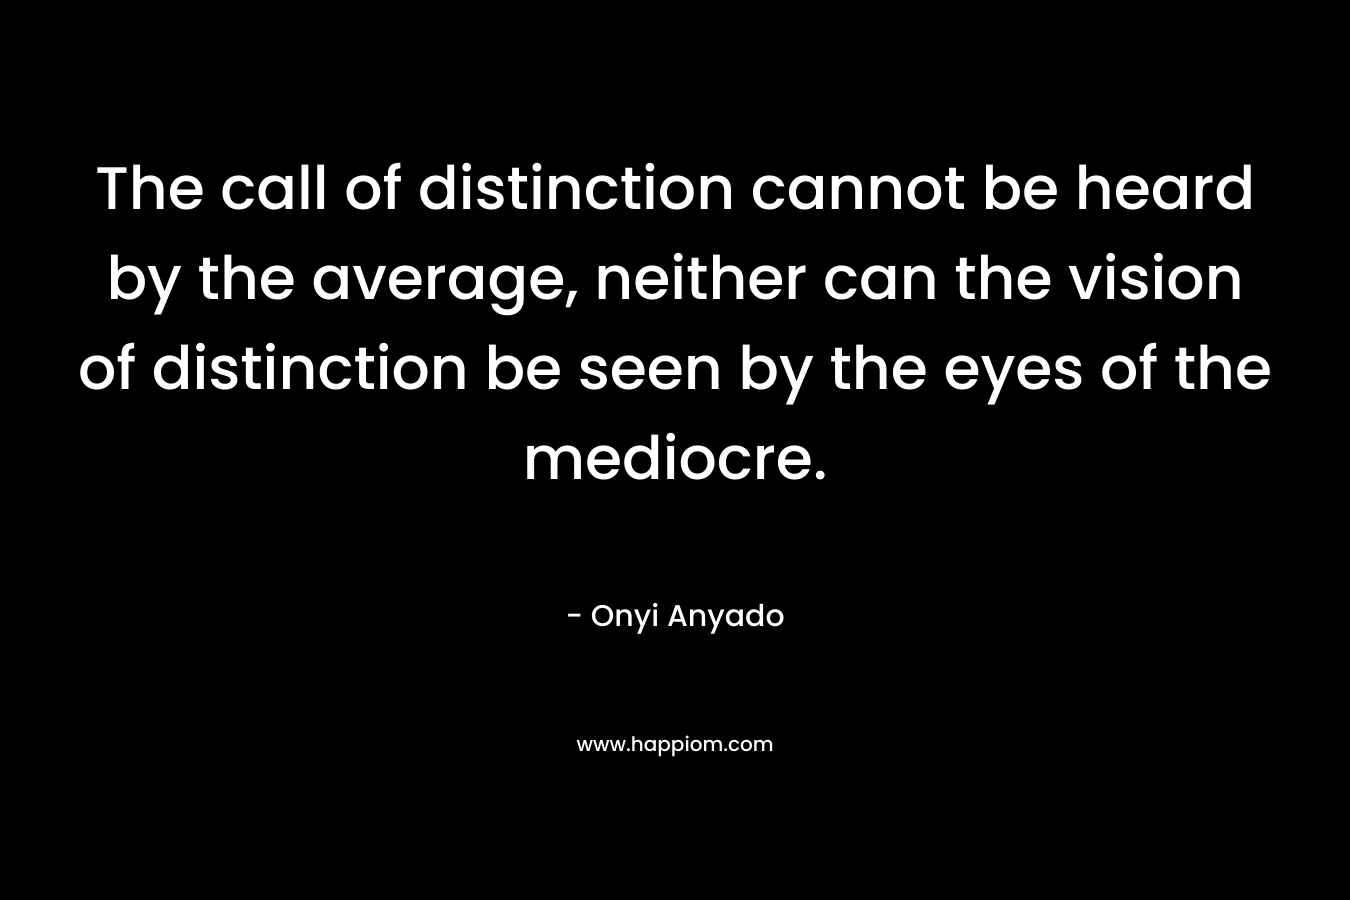 The call of distinction cannot be heard by the average, neither can the vision of distinction be seen by the eyes of the mediocre.